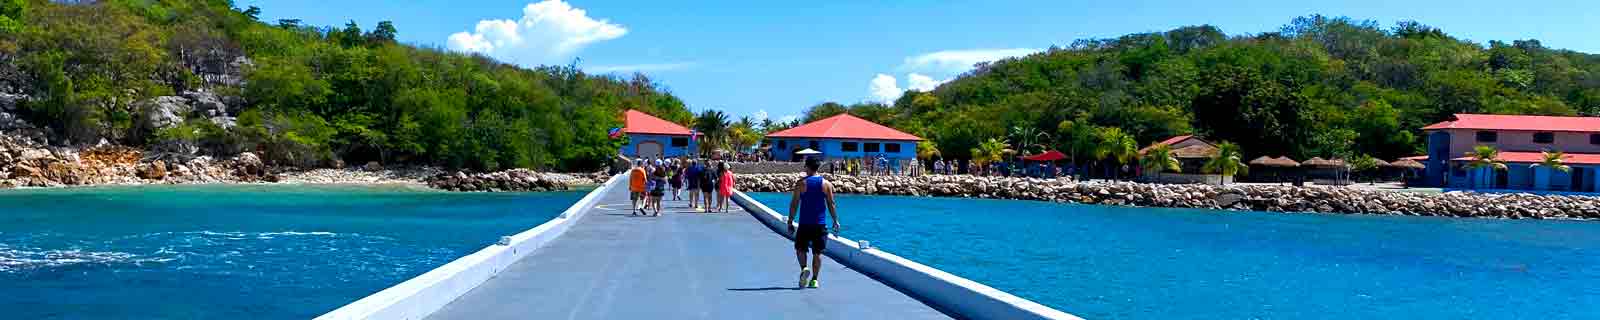 Panoramic photo of the pier and entrance to the Labadee cruise port